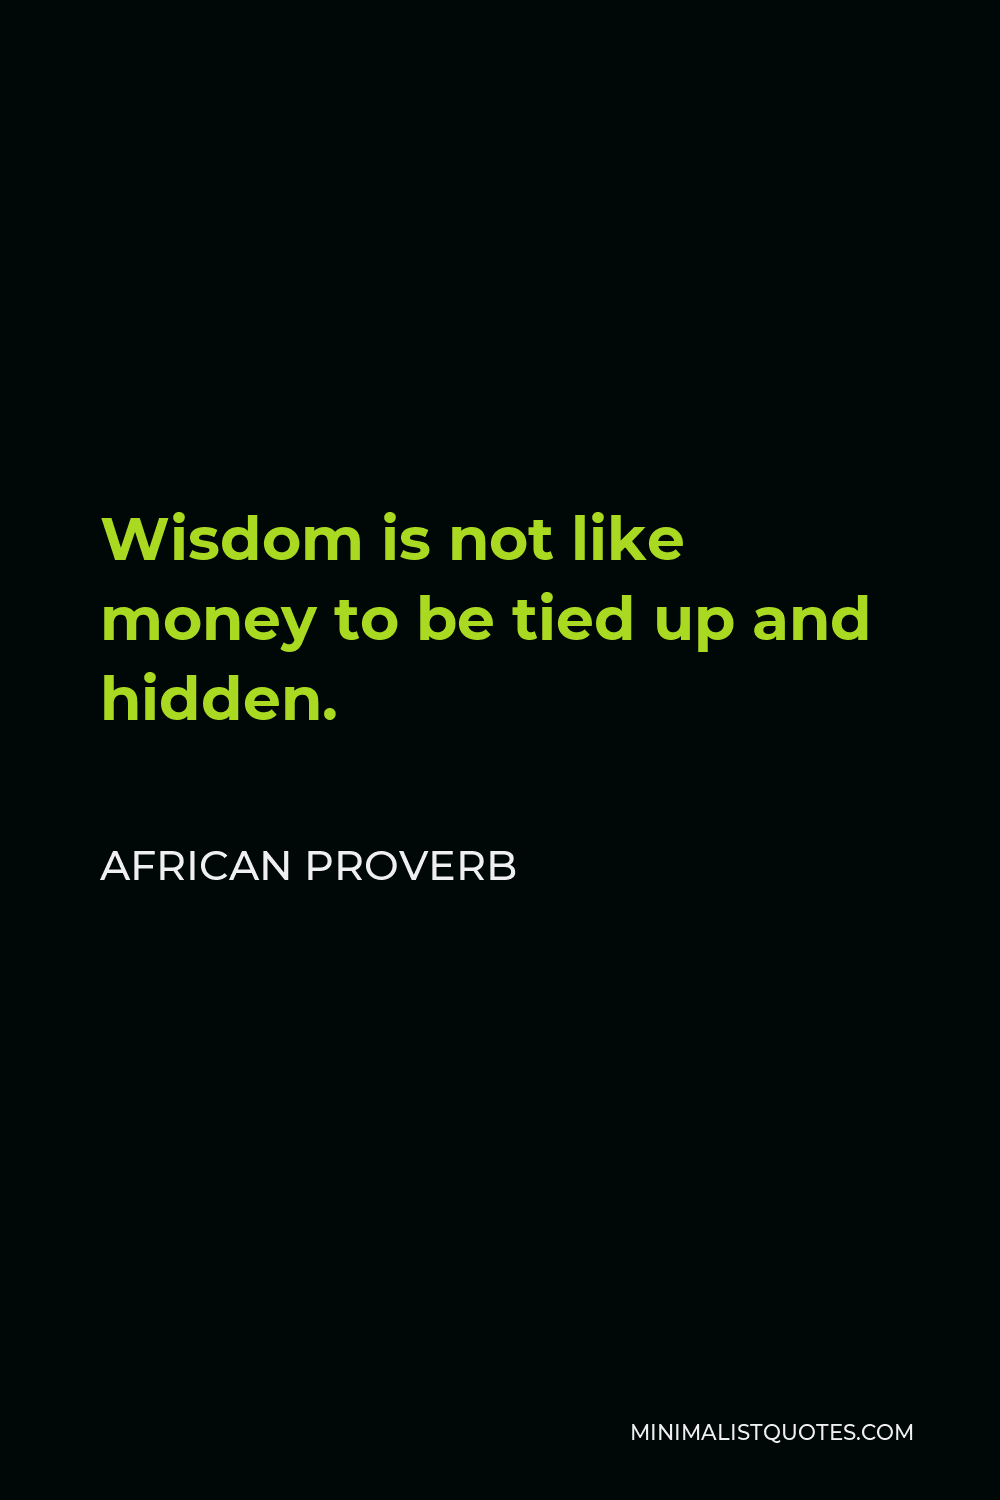 African Proverb Quote - Wisdom is not like money to be tied up and hidden.